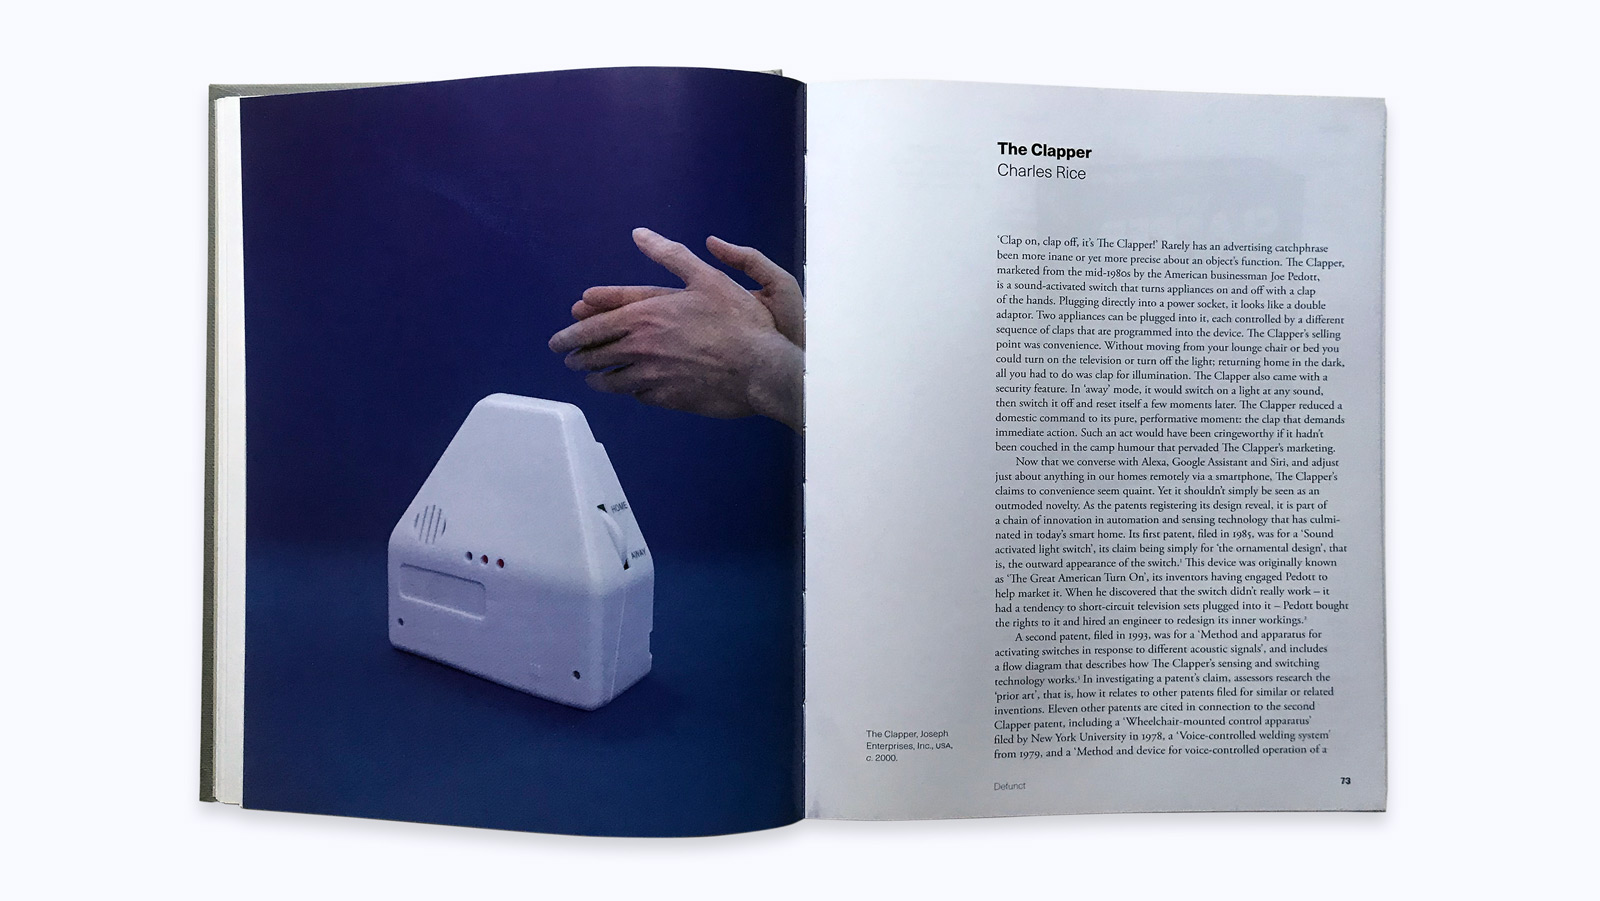 A spread from Extinct: A Compendium of Obsolete Objects shows a photograph of hands clapping over a Clap on Clap off device from the 1990's with a blue background